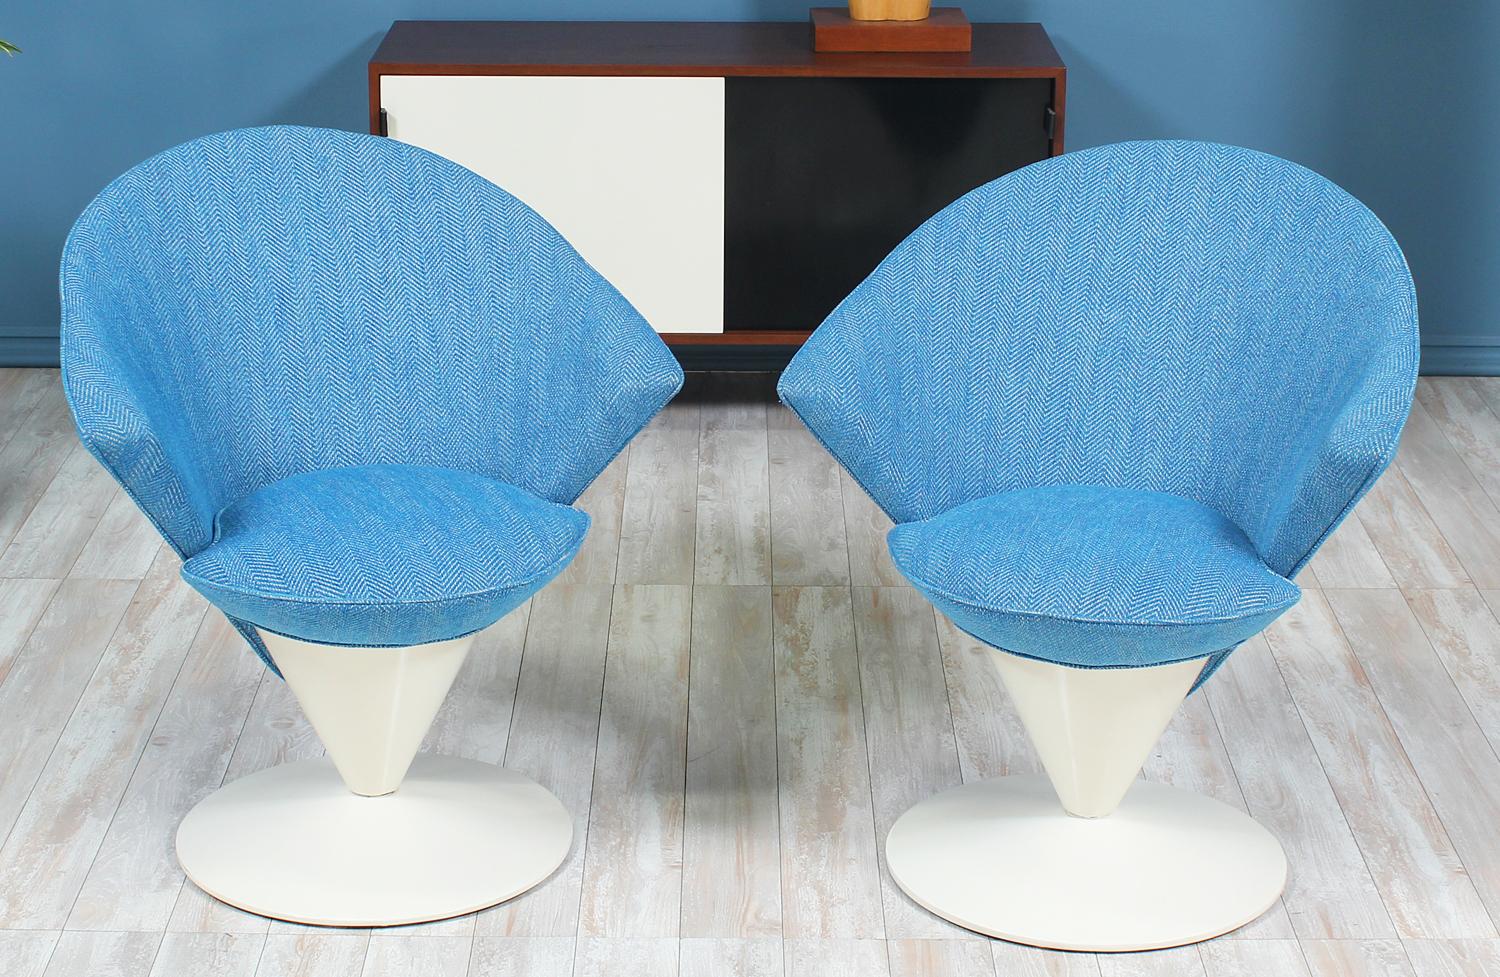 Outstanding pair of Swivel Cone chairs designed by Adrian Pearsall for Craft Associates in the United States circa 1960’s. The chairs feature a new tweed fabric upholstery in a vibrant blue adding style to any room. The swivel base is made of a